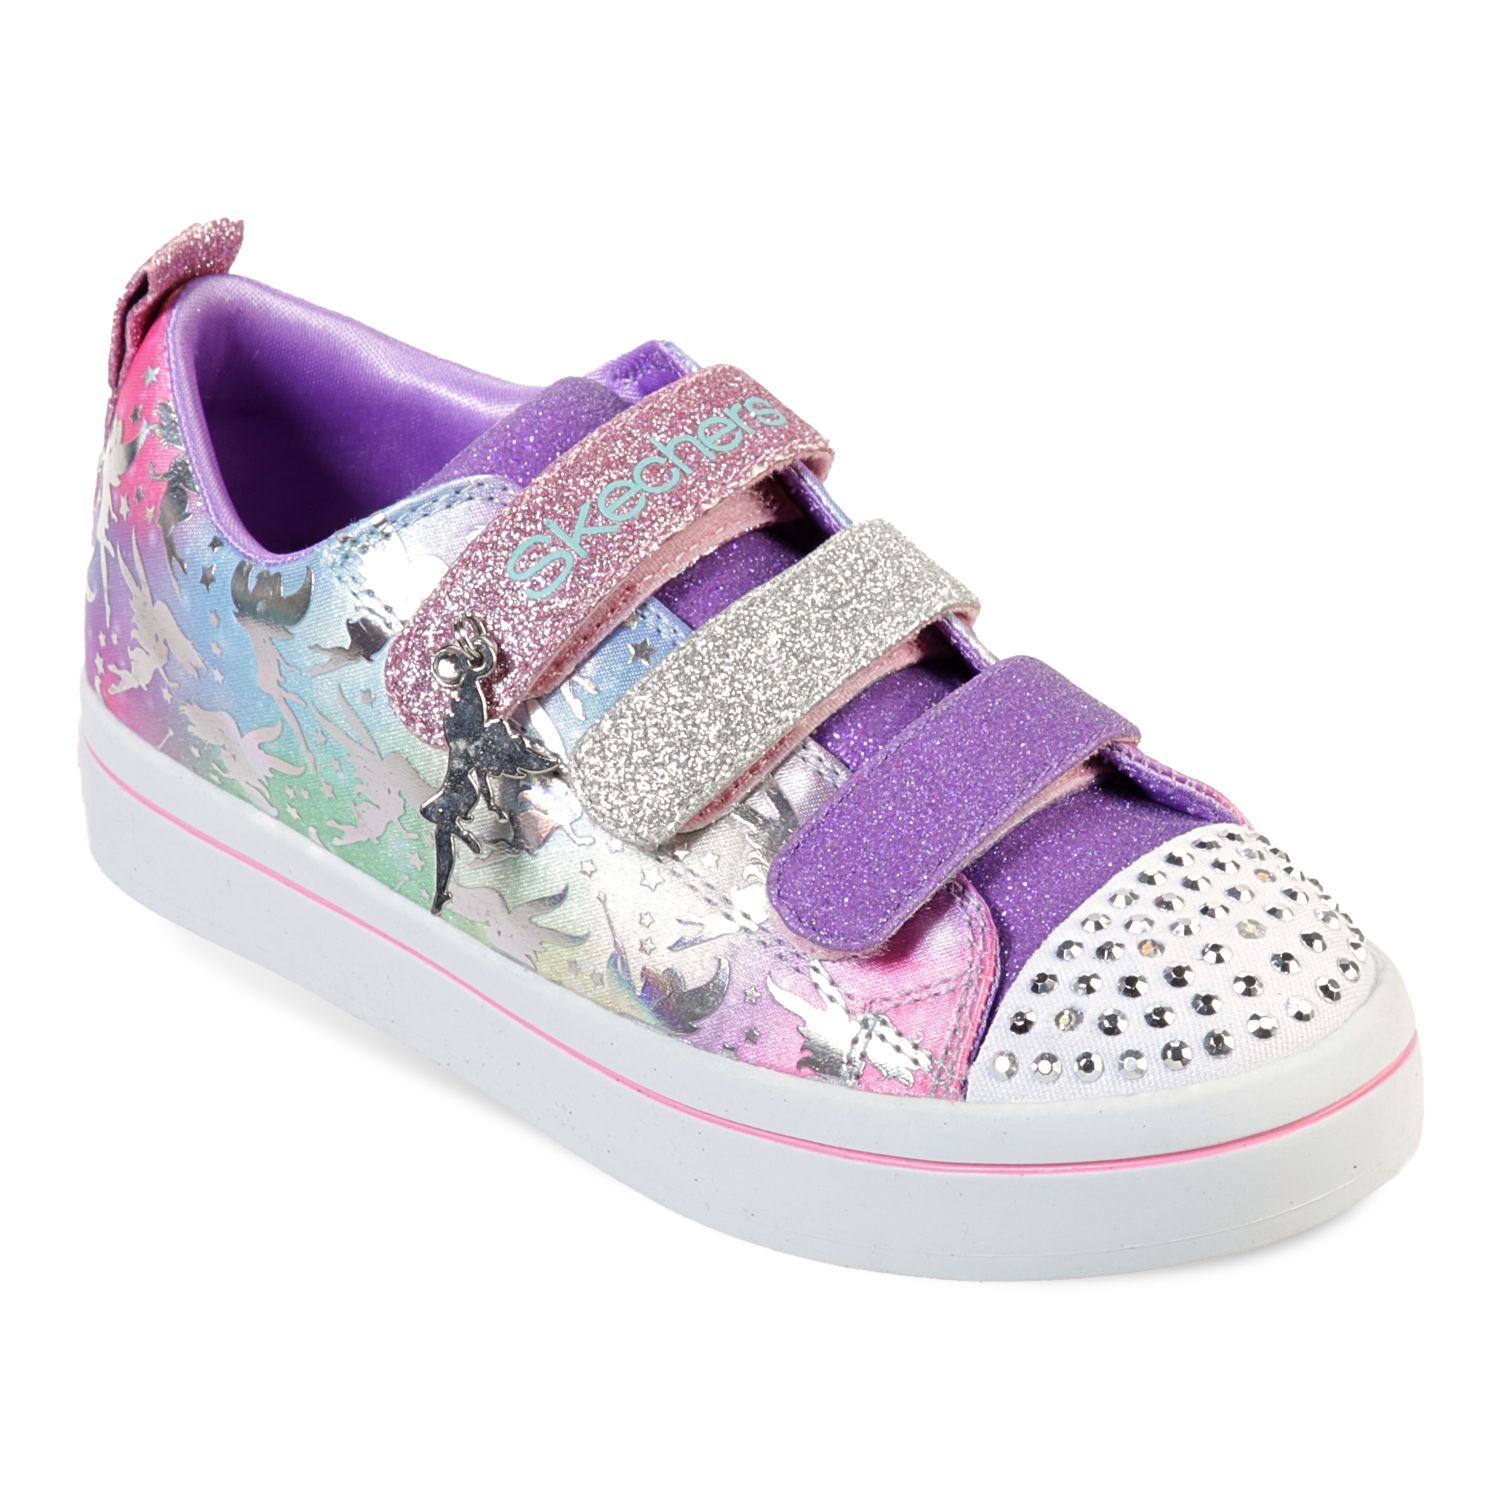 twinkle toes sneakers light up